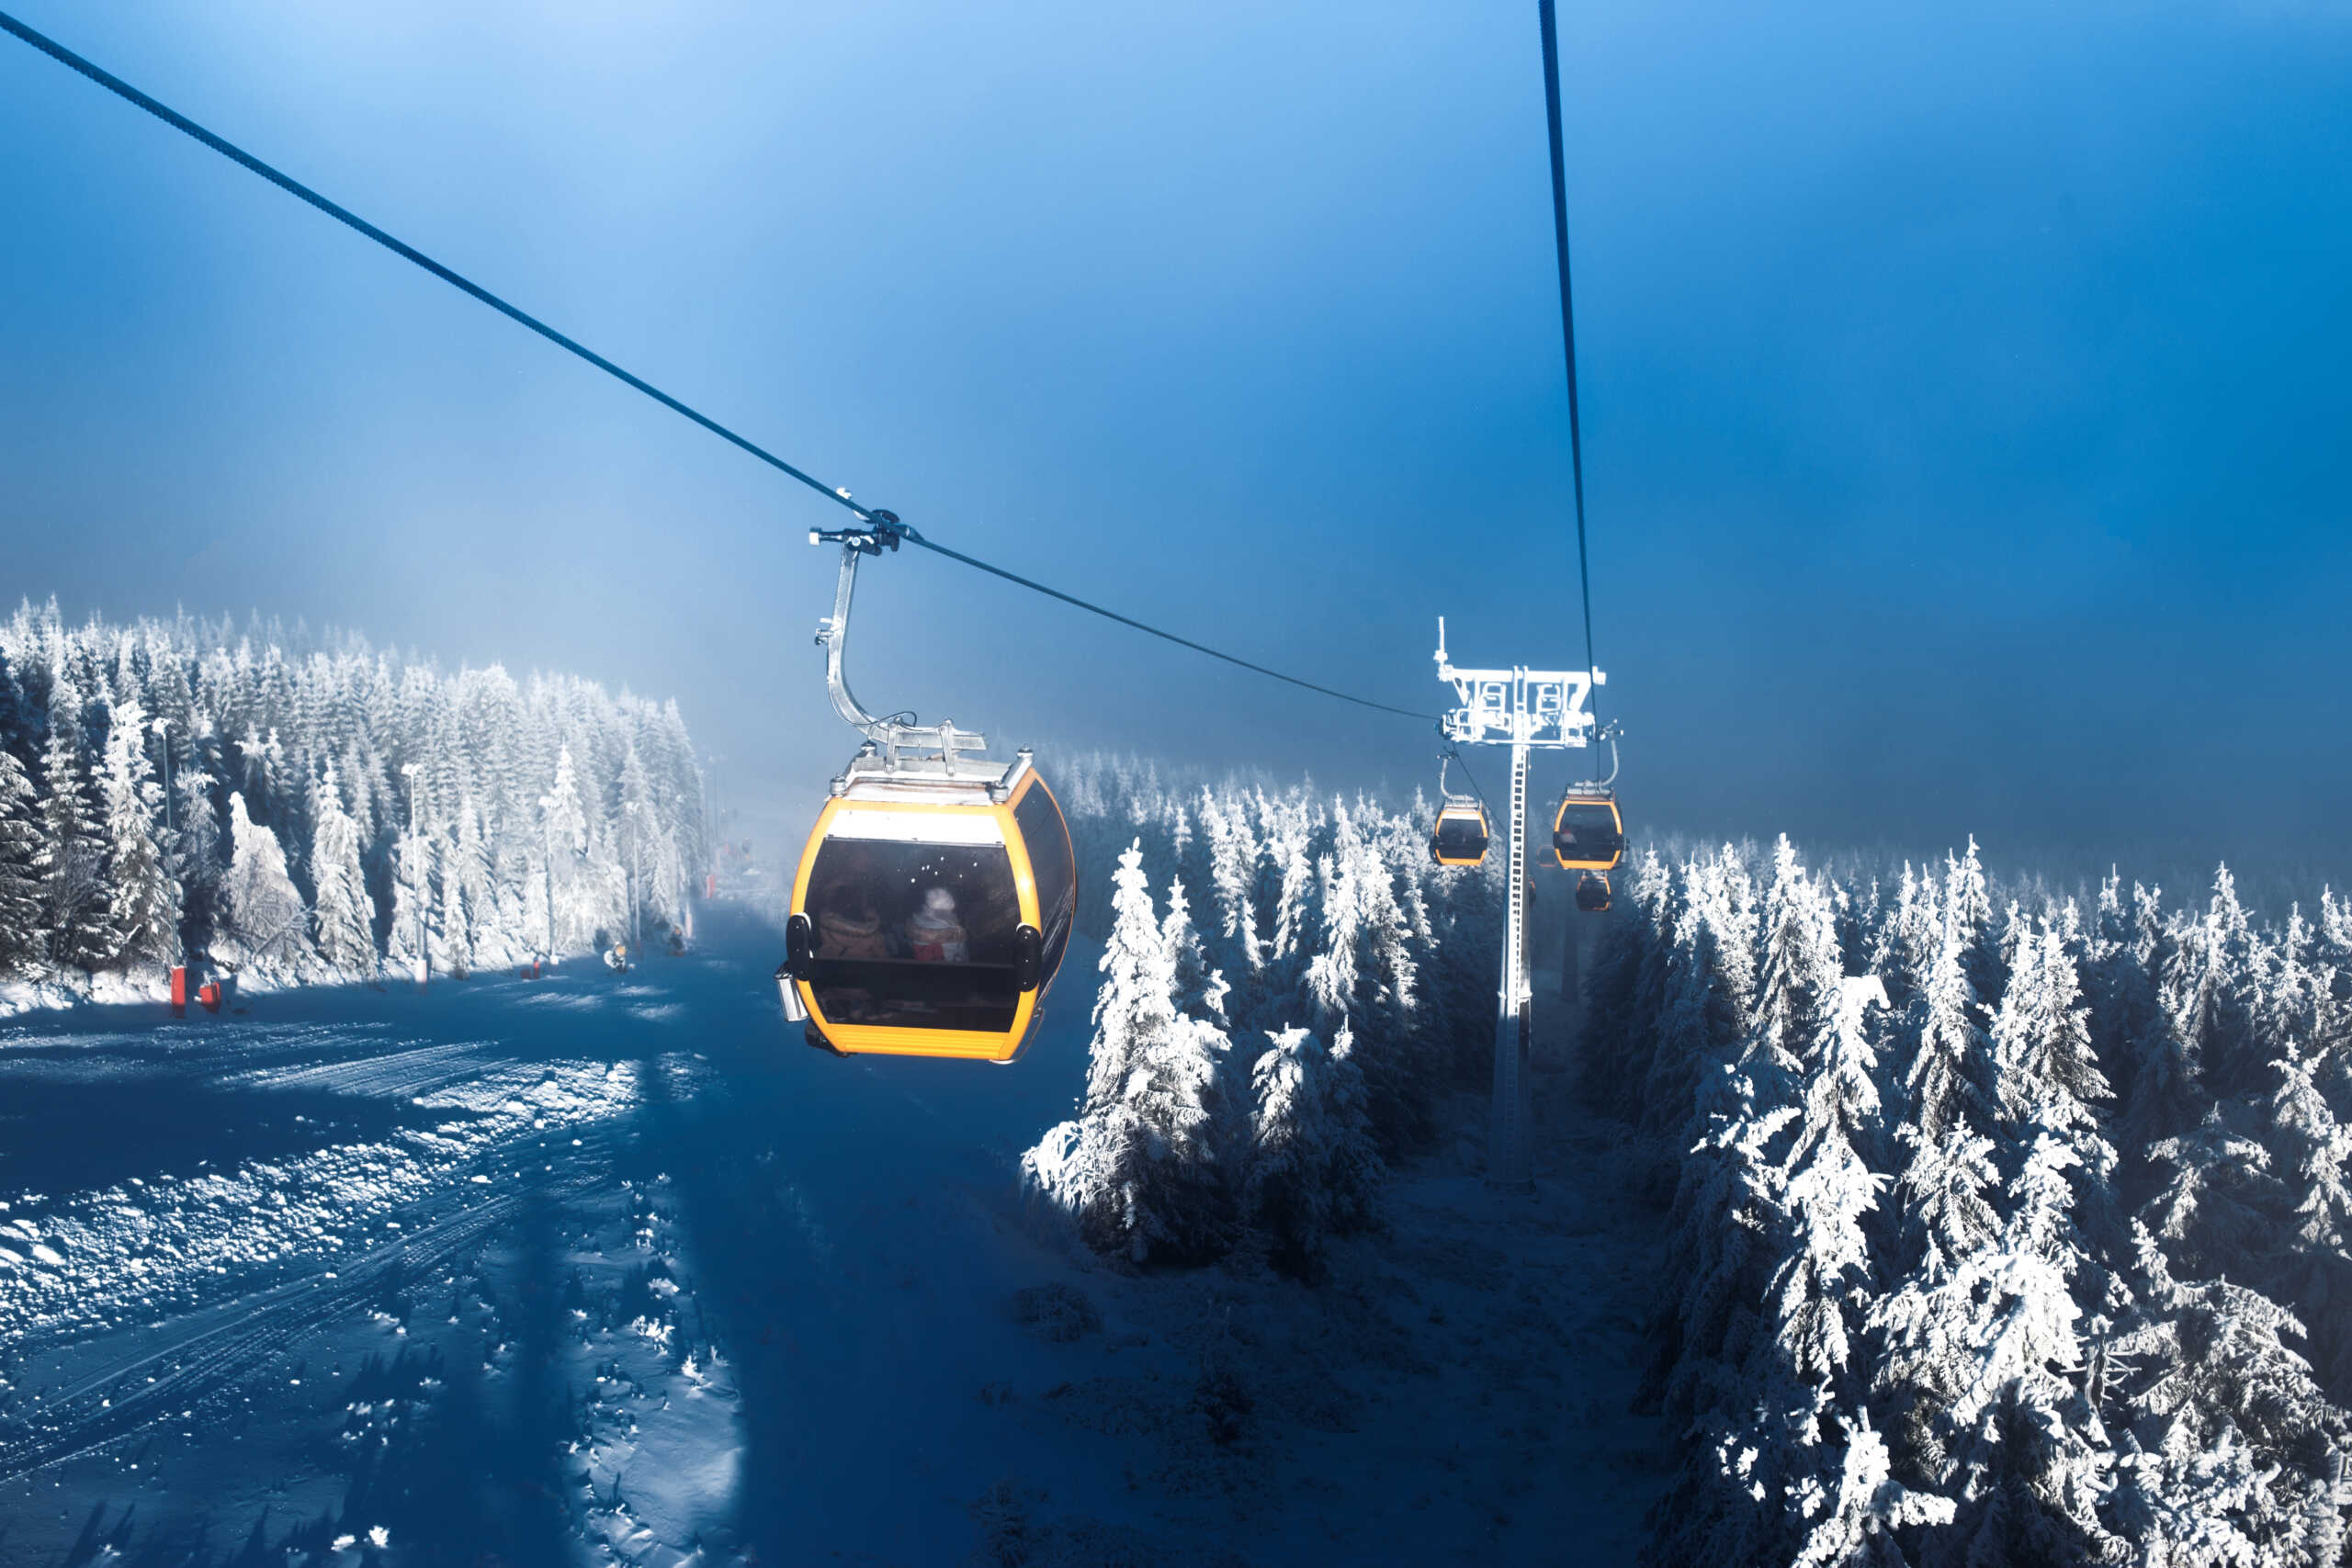 Gondolas rises in the mountains, ski resort, snow covered Christmas trees, winter landscape